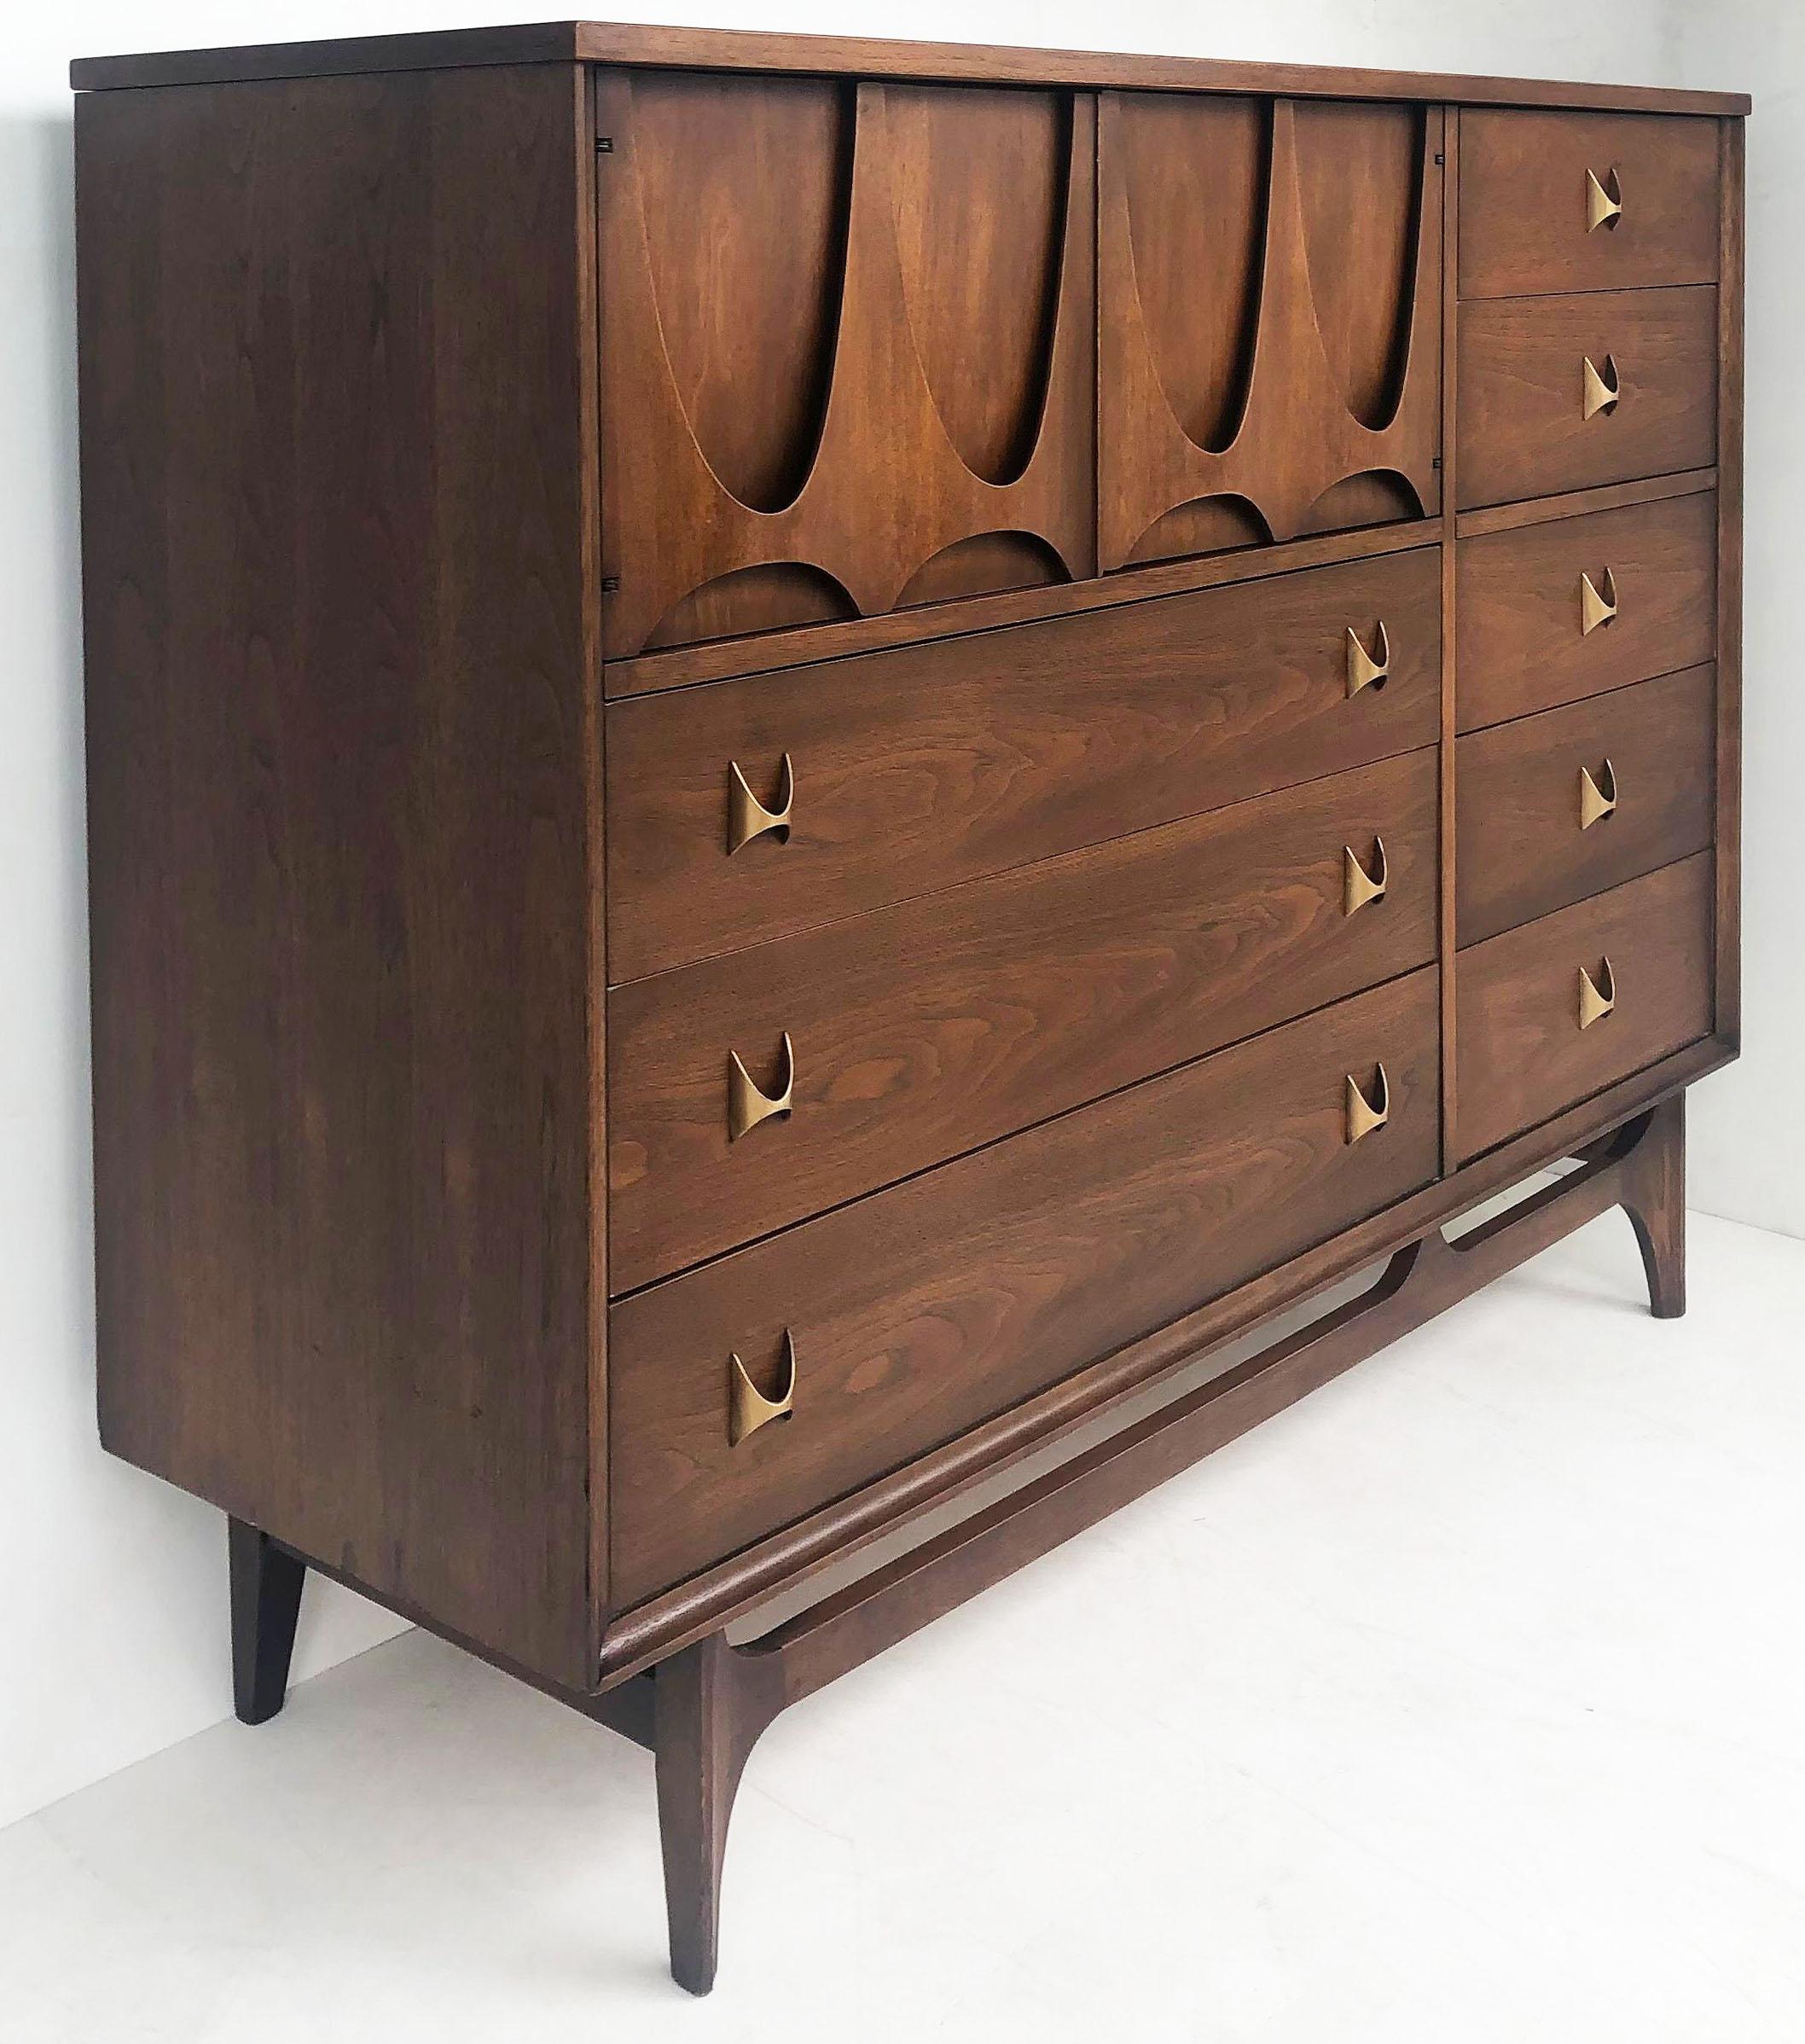 Mid-Century Modern walnut Broyhill Brasilia Magna chest, 1962

Offered for sale is a Mid-Century Modern walnut Broyhill Premier Brasilia 